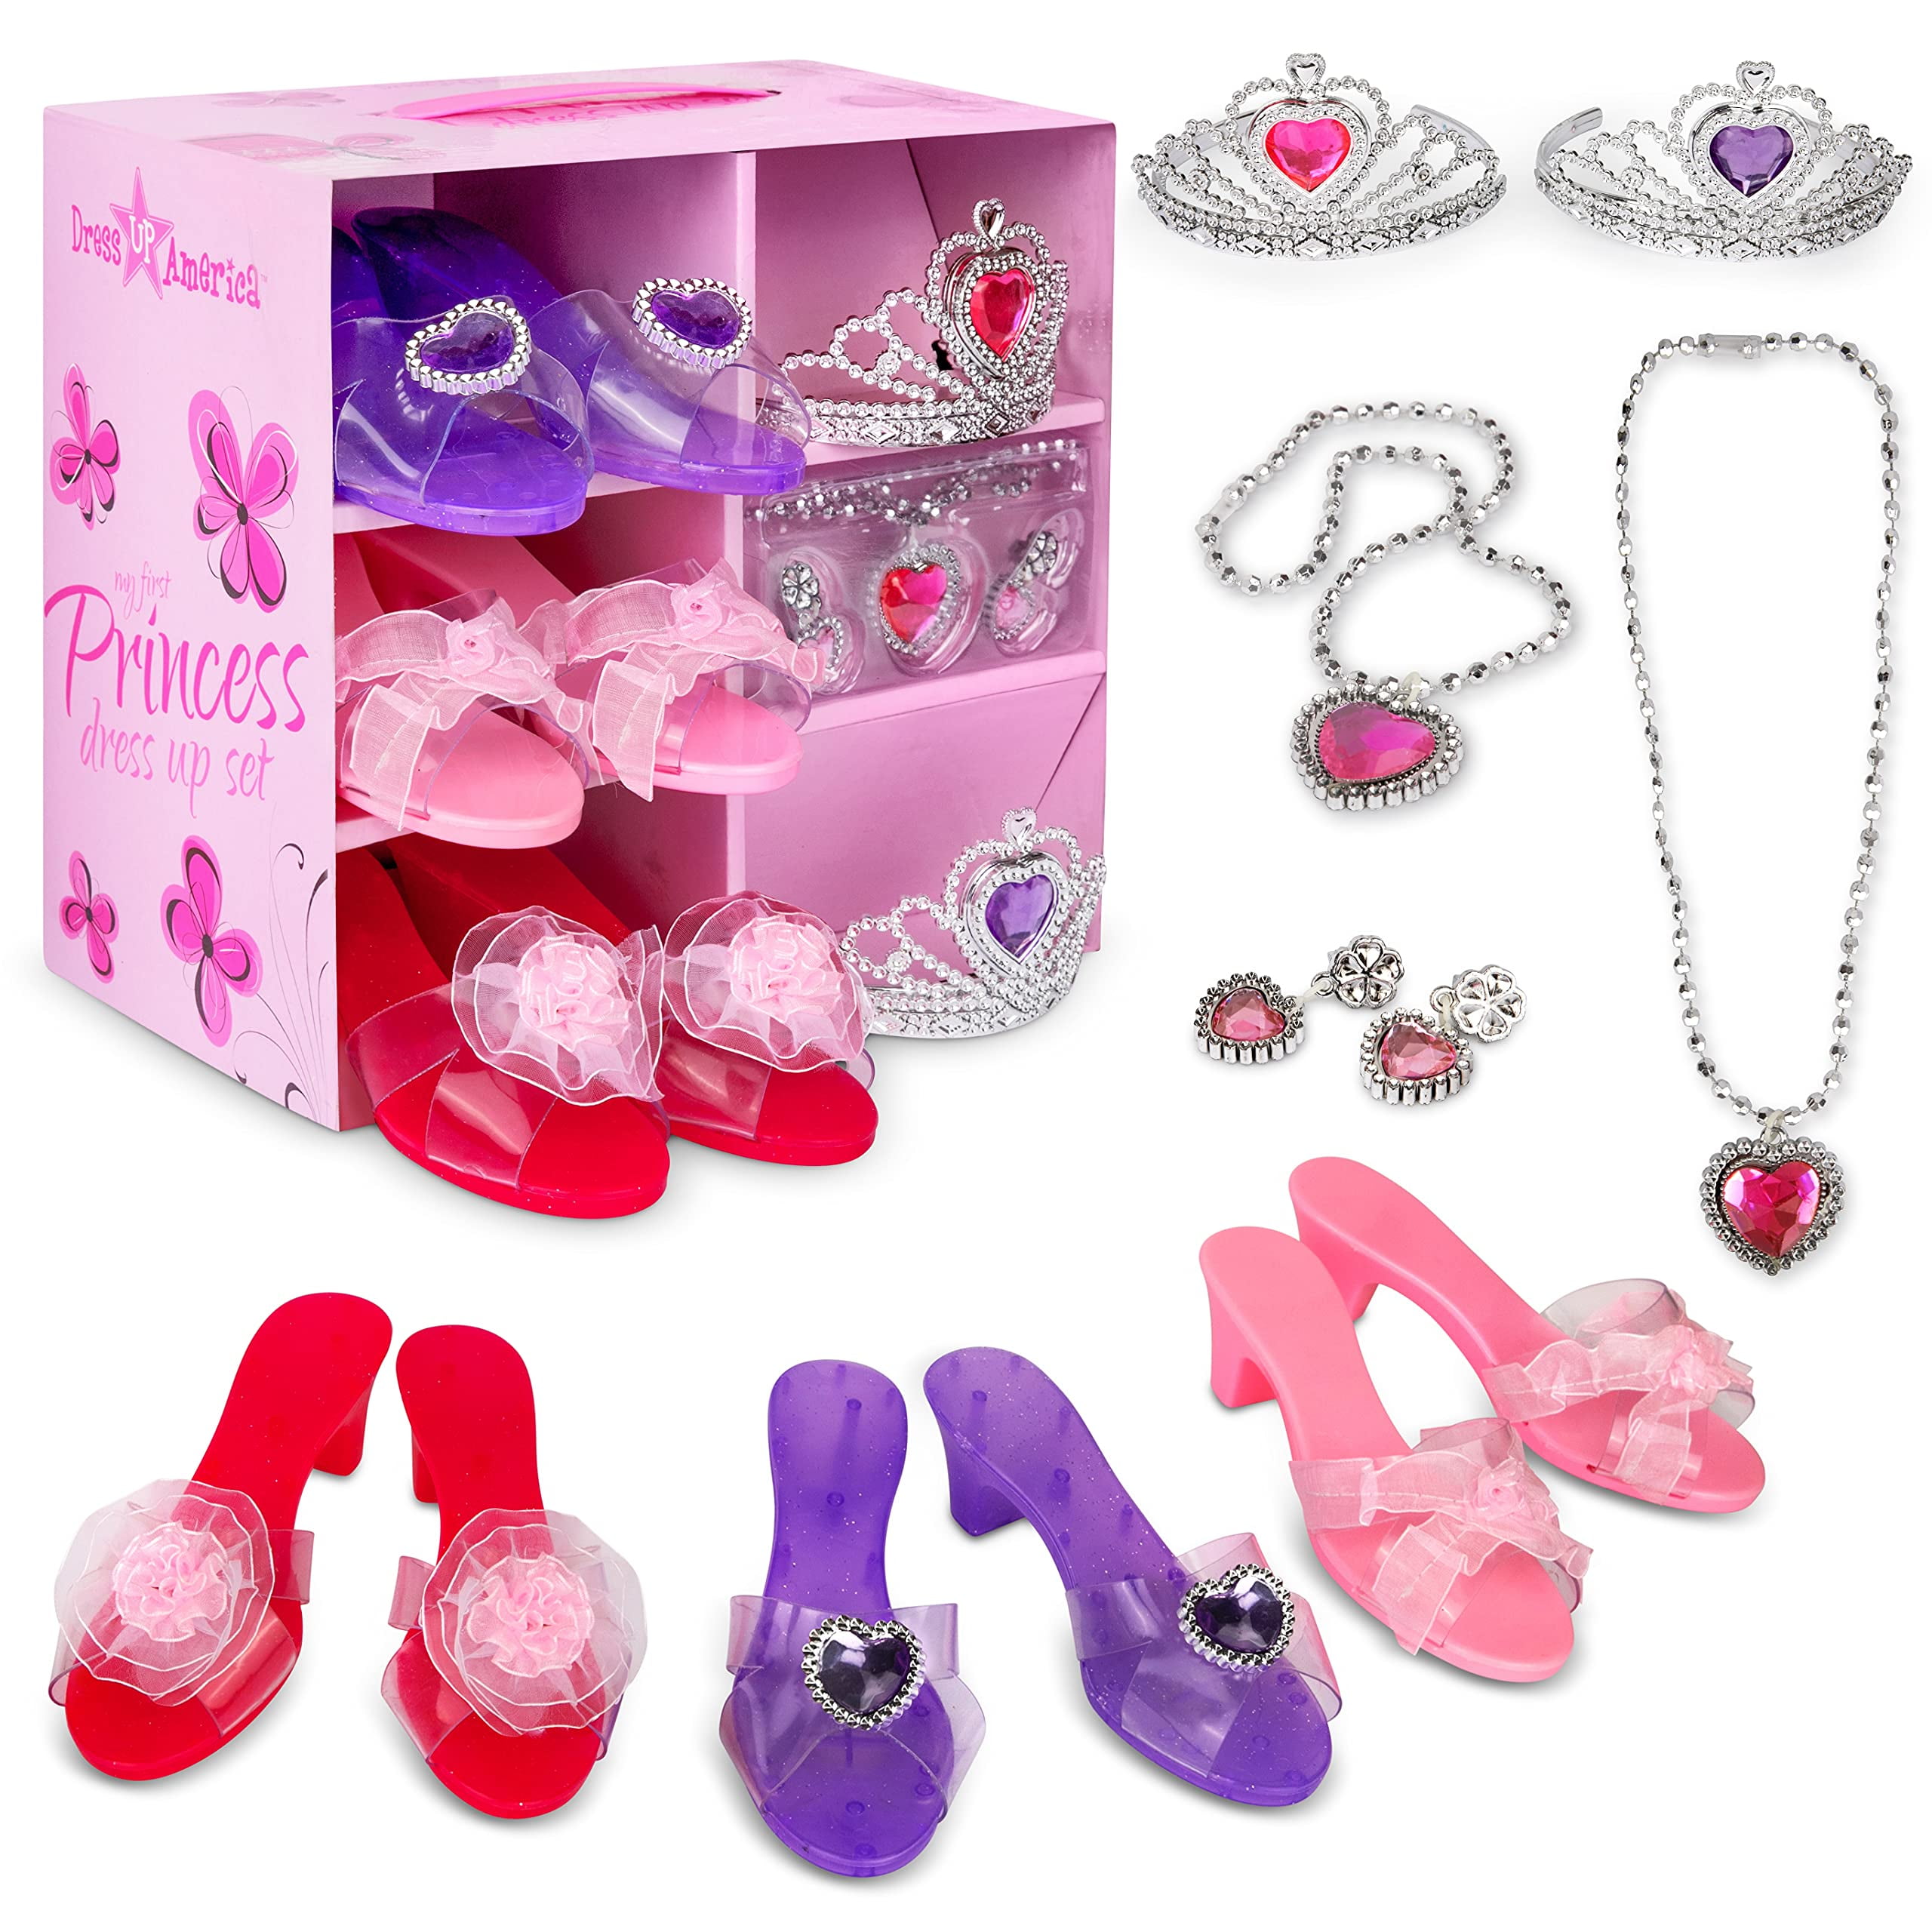 Little Girl Princess Play Gift Set with ... JaxoJoy Shoes and Jewelry Boutique 